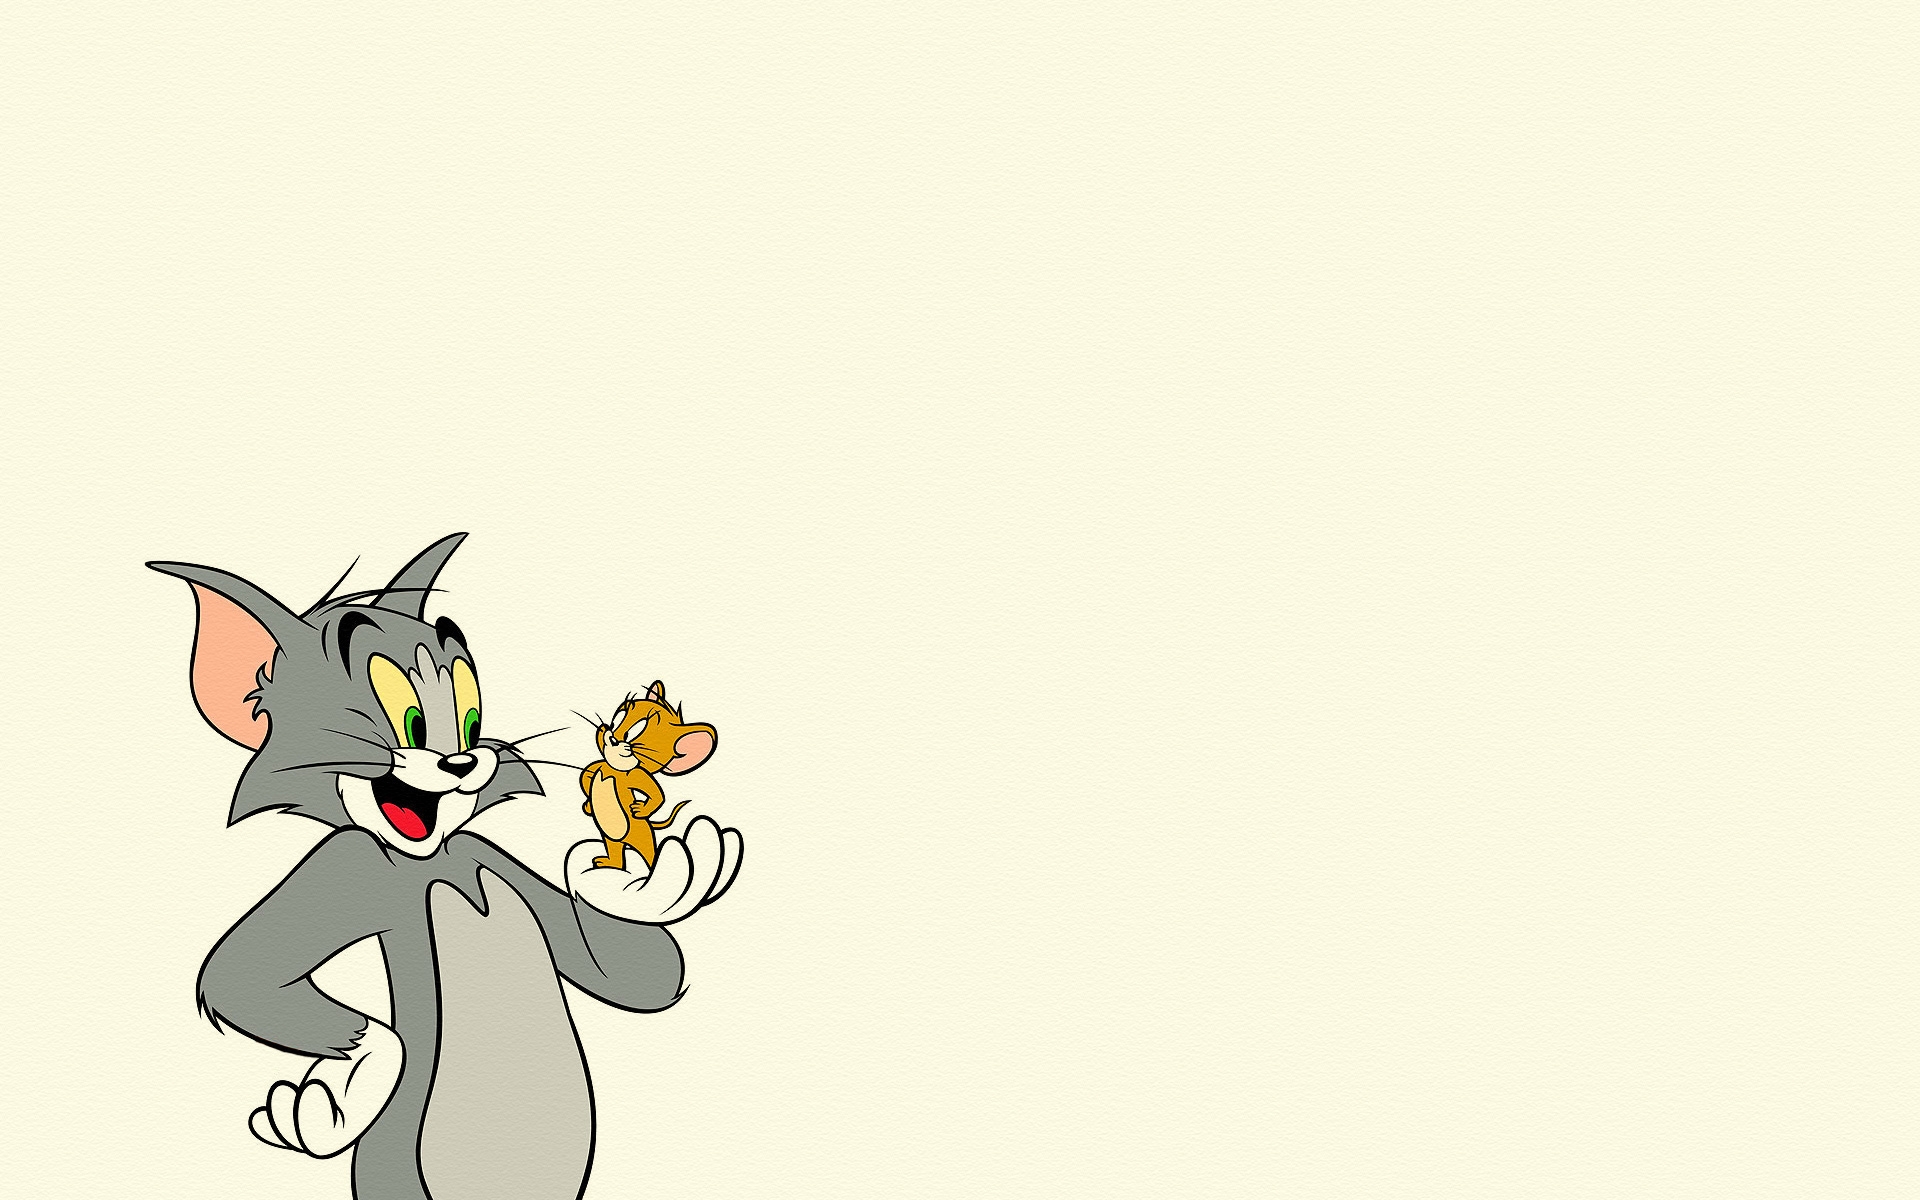 Wallpaper, 1920x1200 px, animals, cats, children, felines, funny, humor, jerry, mice, mouse, tom 1920x1200